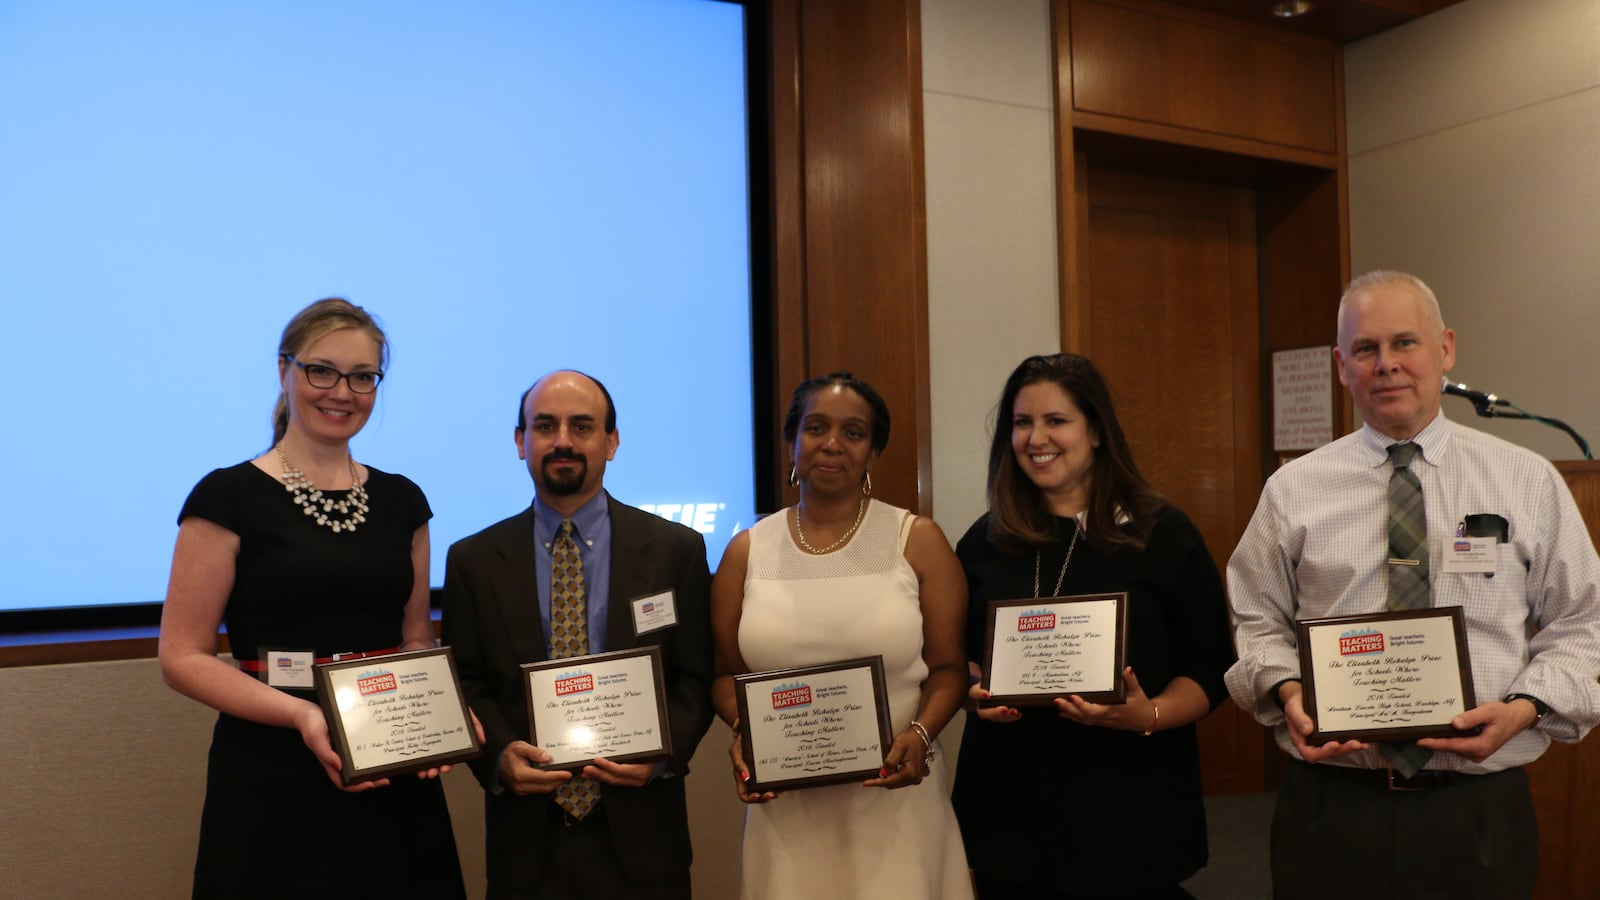 Joanna Freedman (second from right), pictured here with four other semi-finalists, accepted the grand prize Teaching Matters award